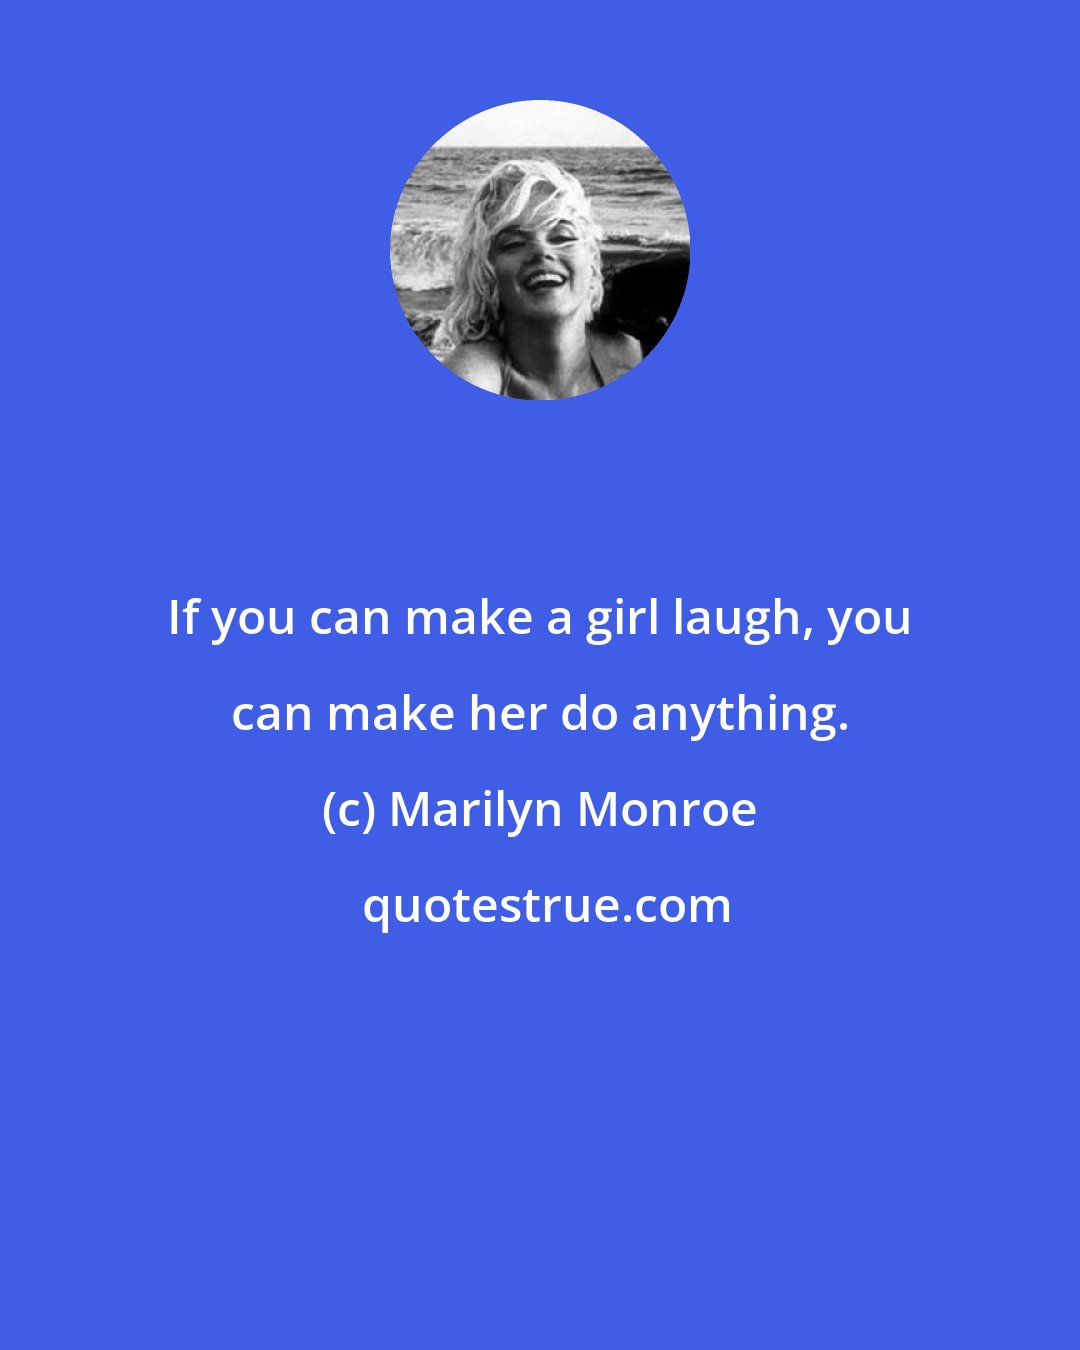 Marilyn Monroe: If you can make a girl laugh, you can make her do anything.